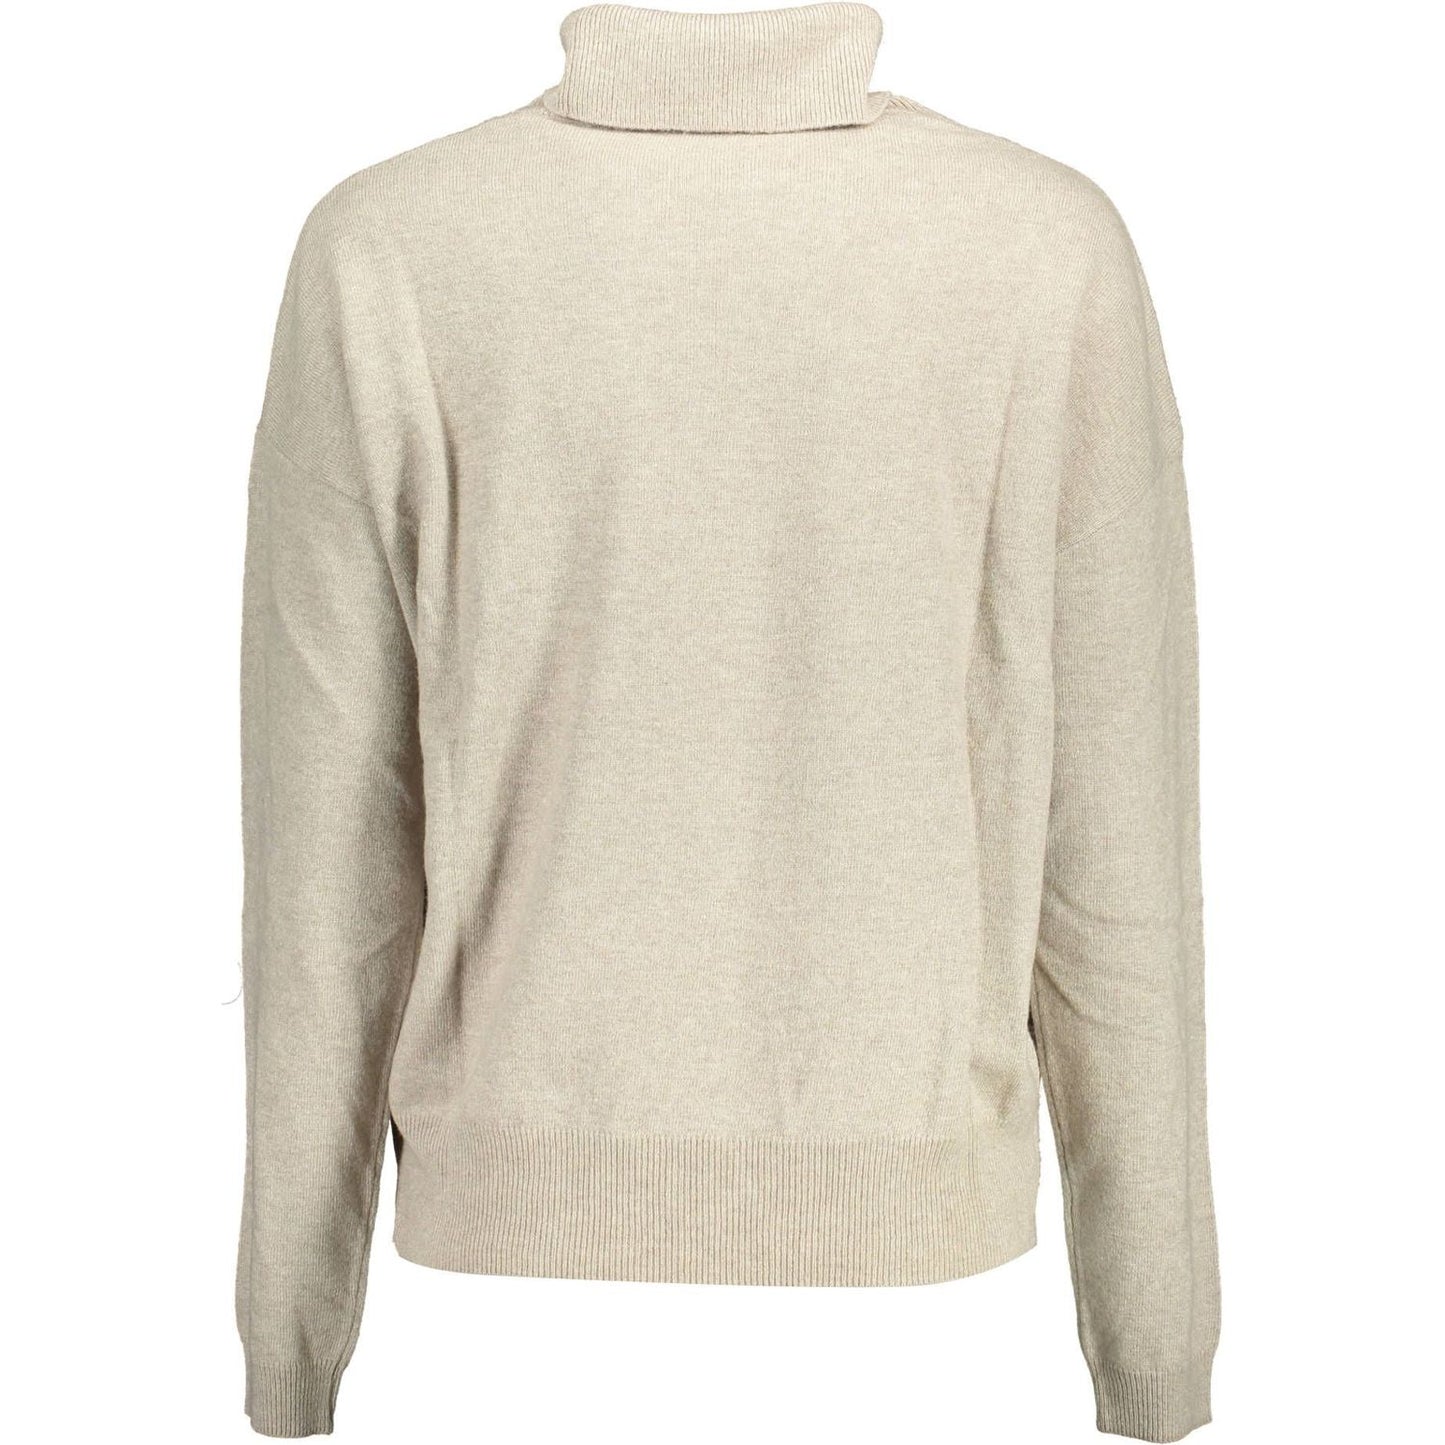 U.S. POLO ASSN. Chic Beige Turtleneck with Elegant Embroidery chic-beige-turtleneck-with-elegant-embroidery